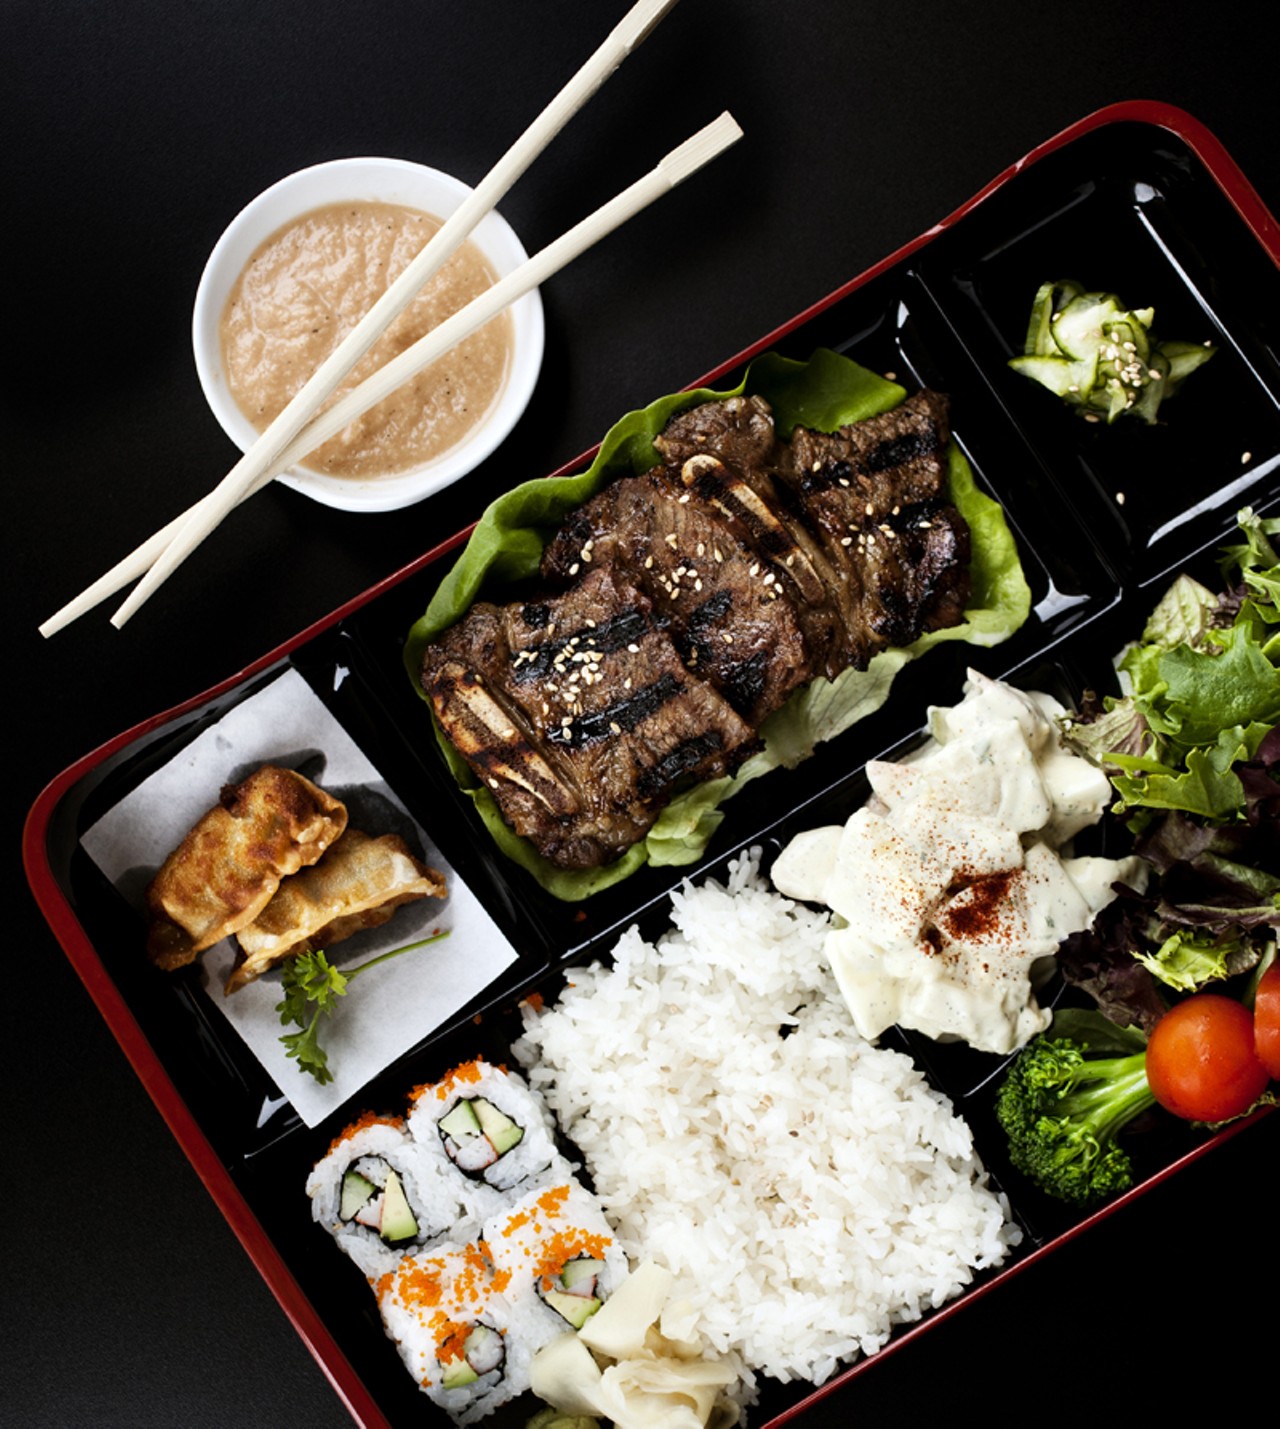 The Kalbi (beef short rib) bento box comes with two pieces of gyoza, four pieces califronia roll, potato salad, sunomono (cucumber salad) and house salad.